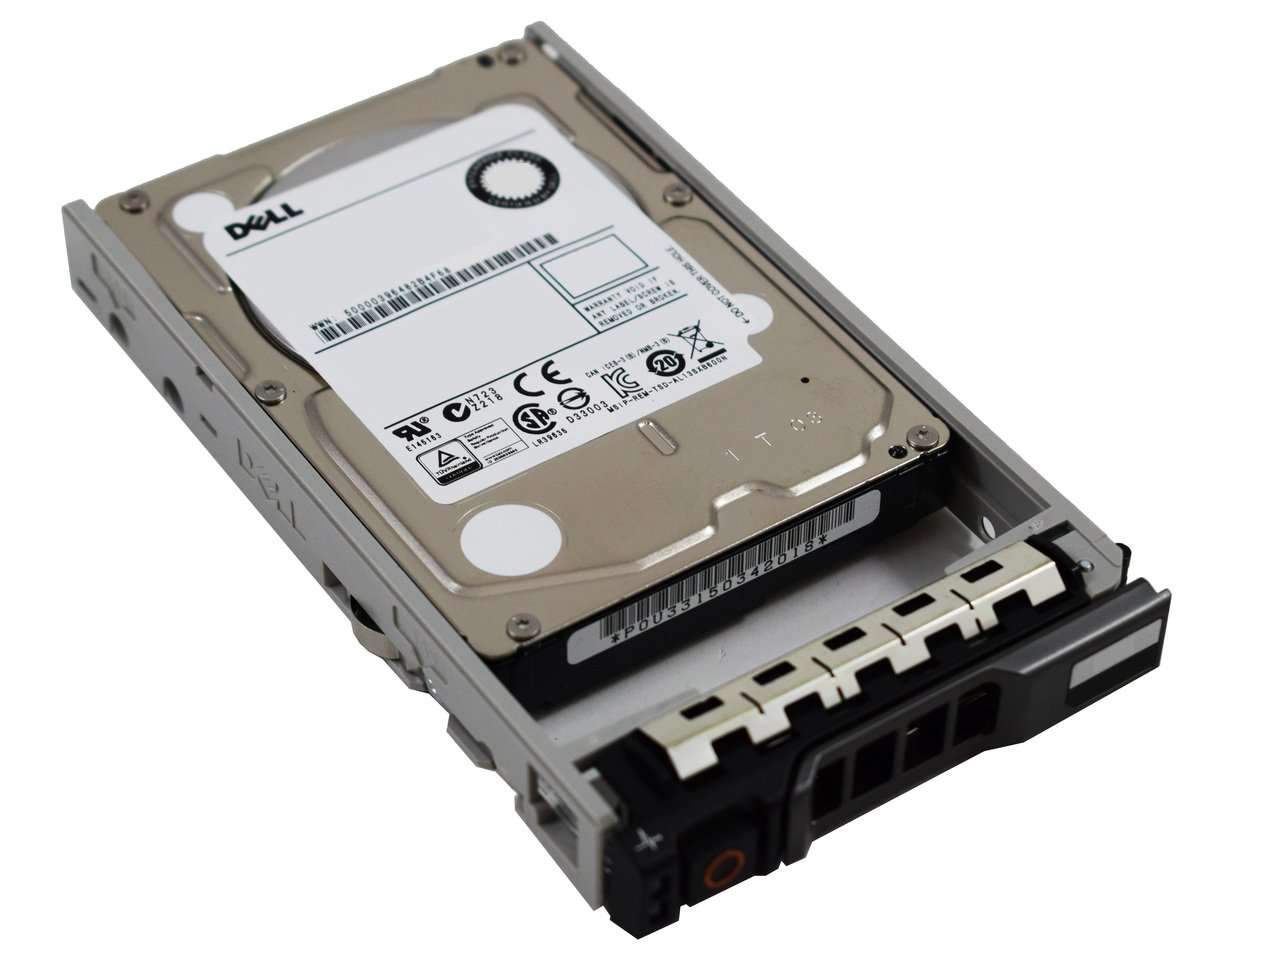 Dell G13 990FD 600GB 15K RPM SAS 12Gb/s 512n 2.5" Manufacturer Recertified HDD